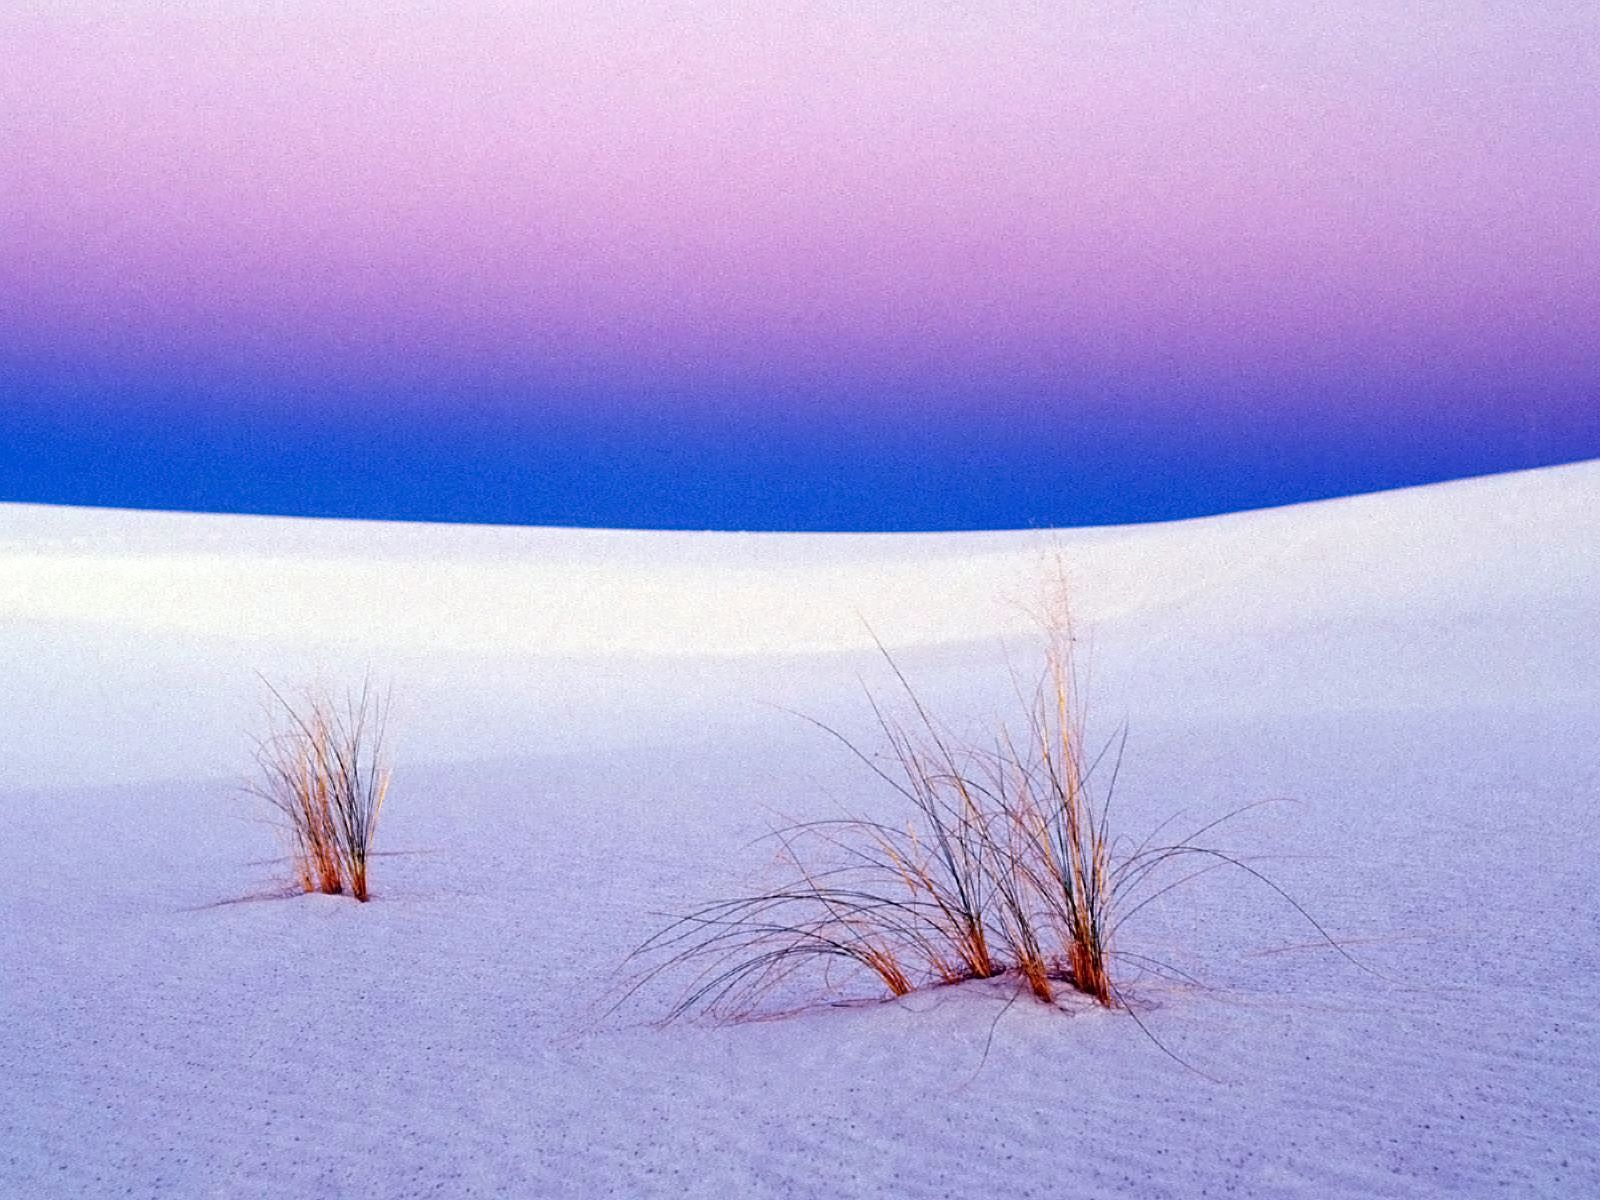 White Sands, New Mexico. They have moonlight walks in the park